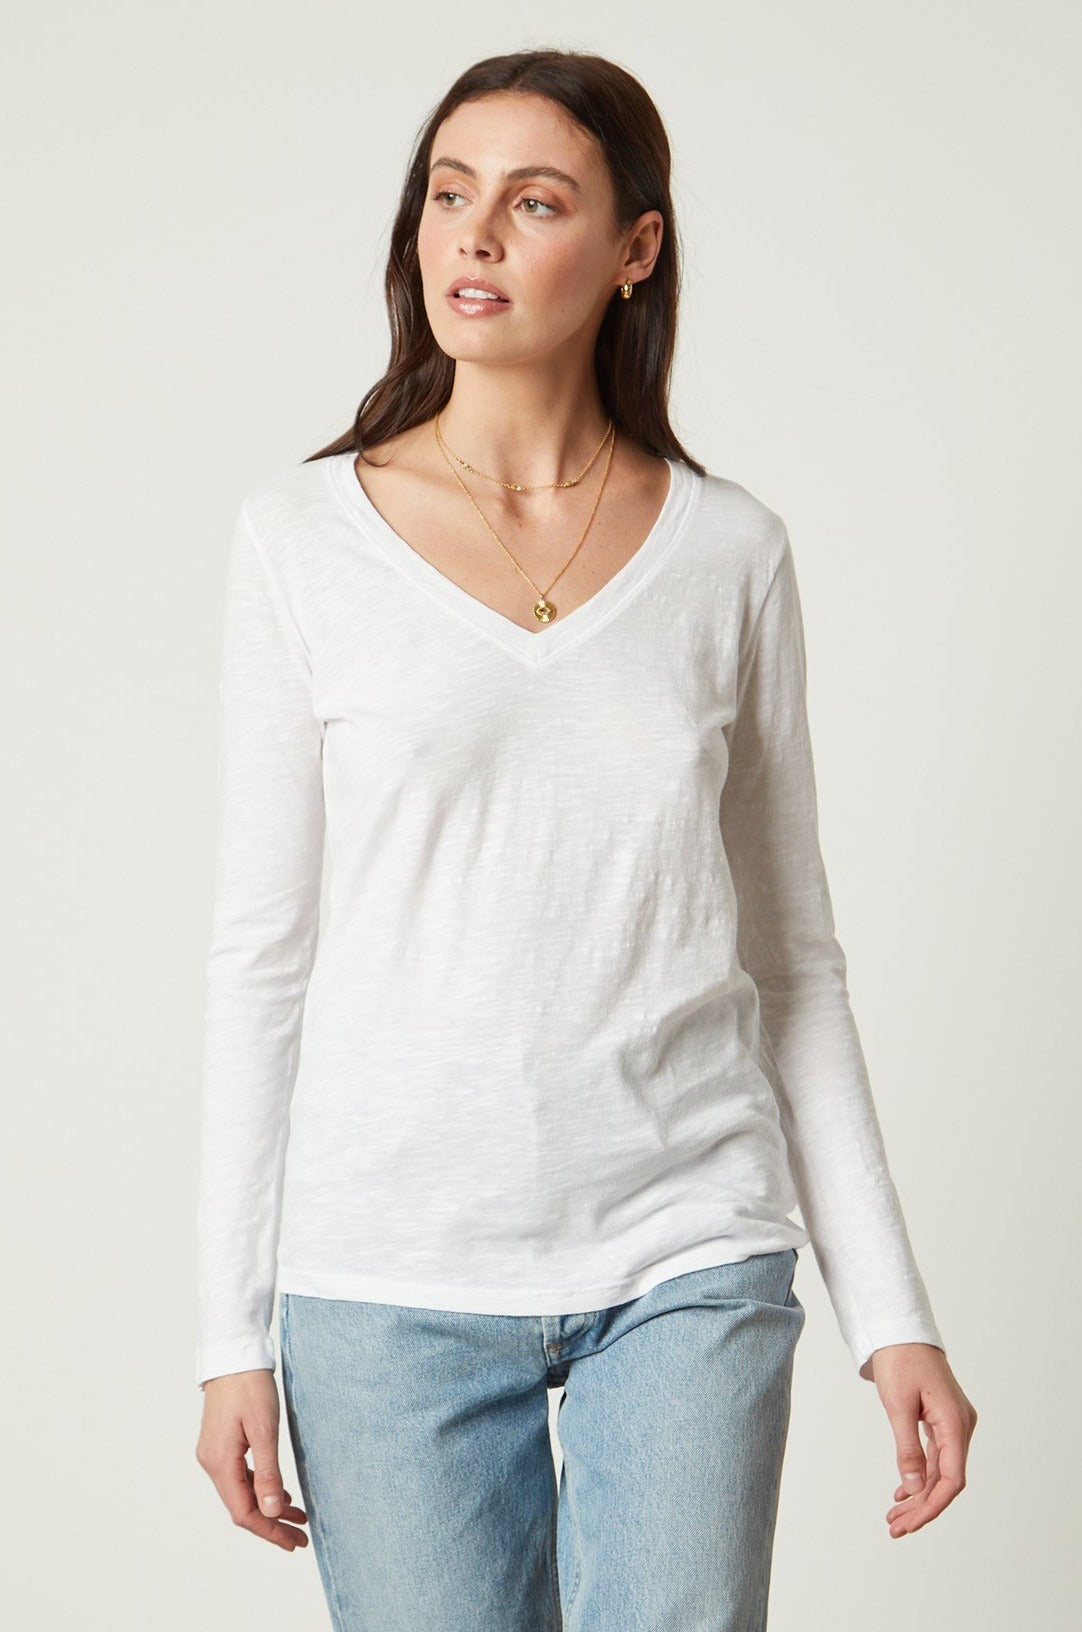   Blaire Original Slub Long Sleeve Tee with V Neck in white with light blue denim front view 